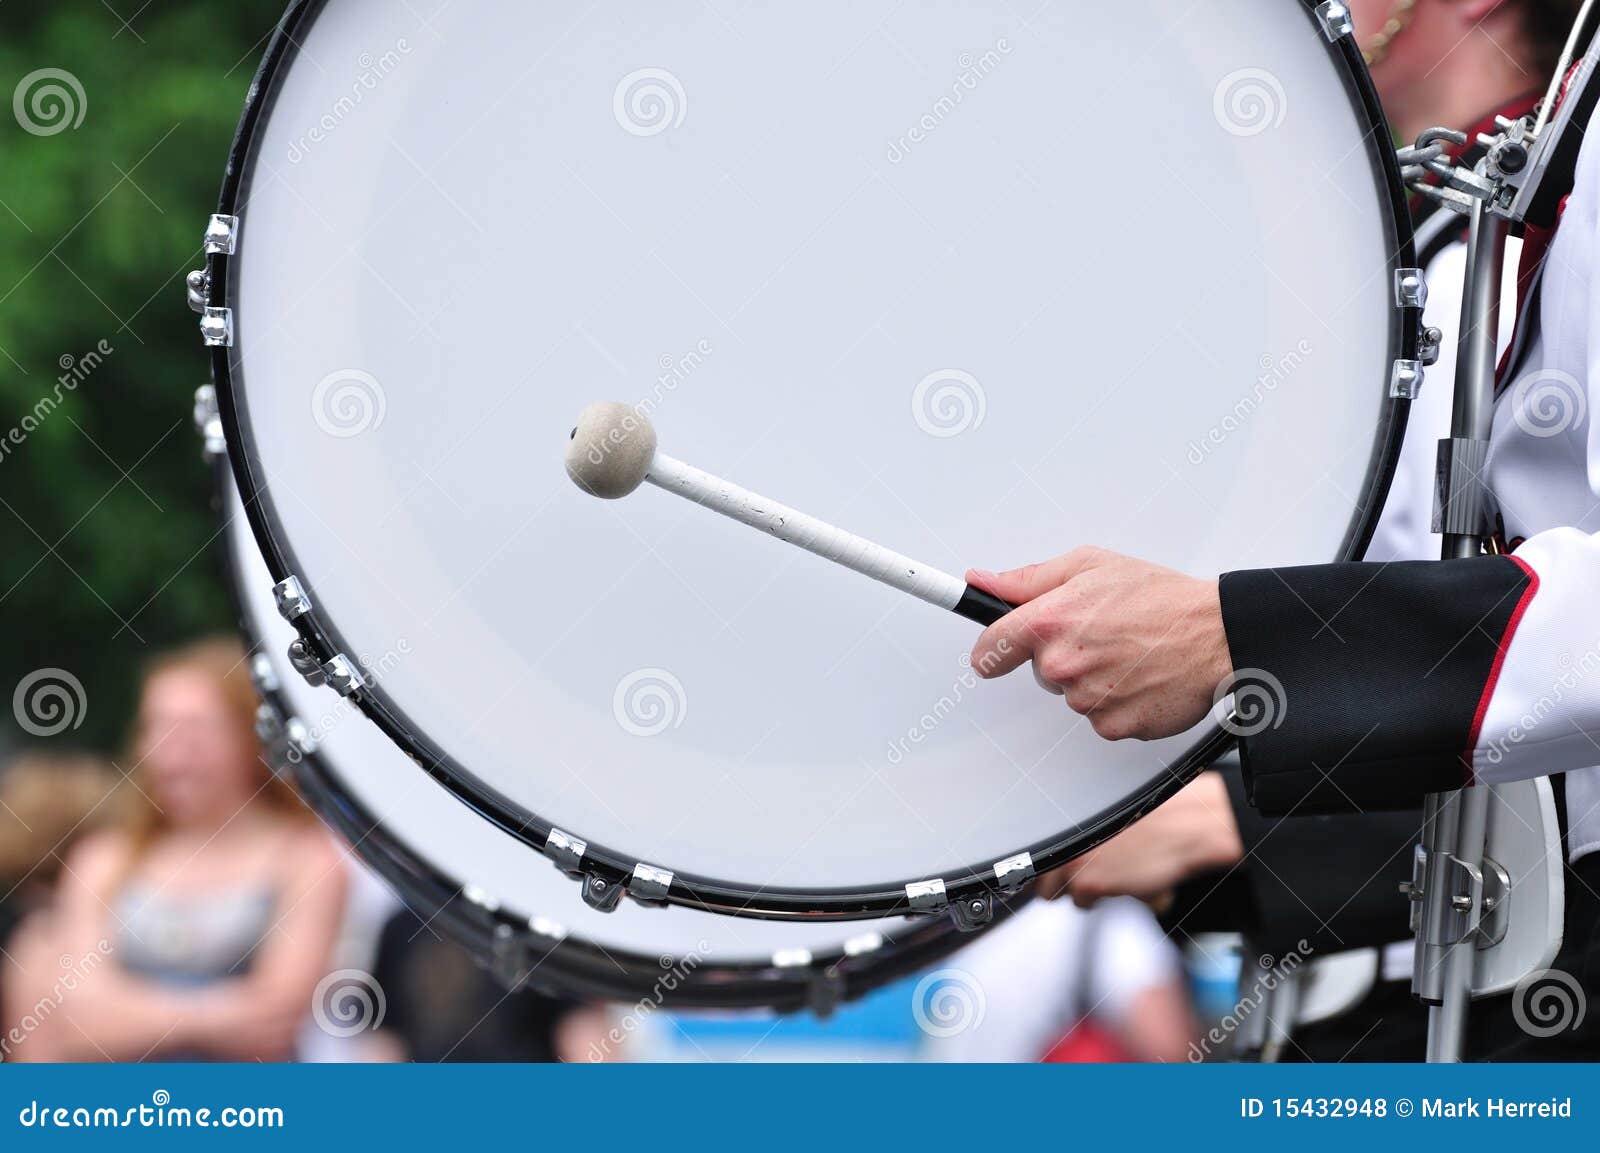 drummer playing bass drum in parade